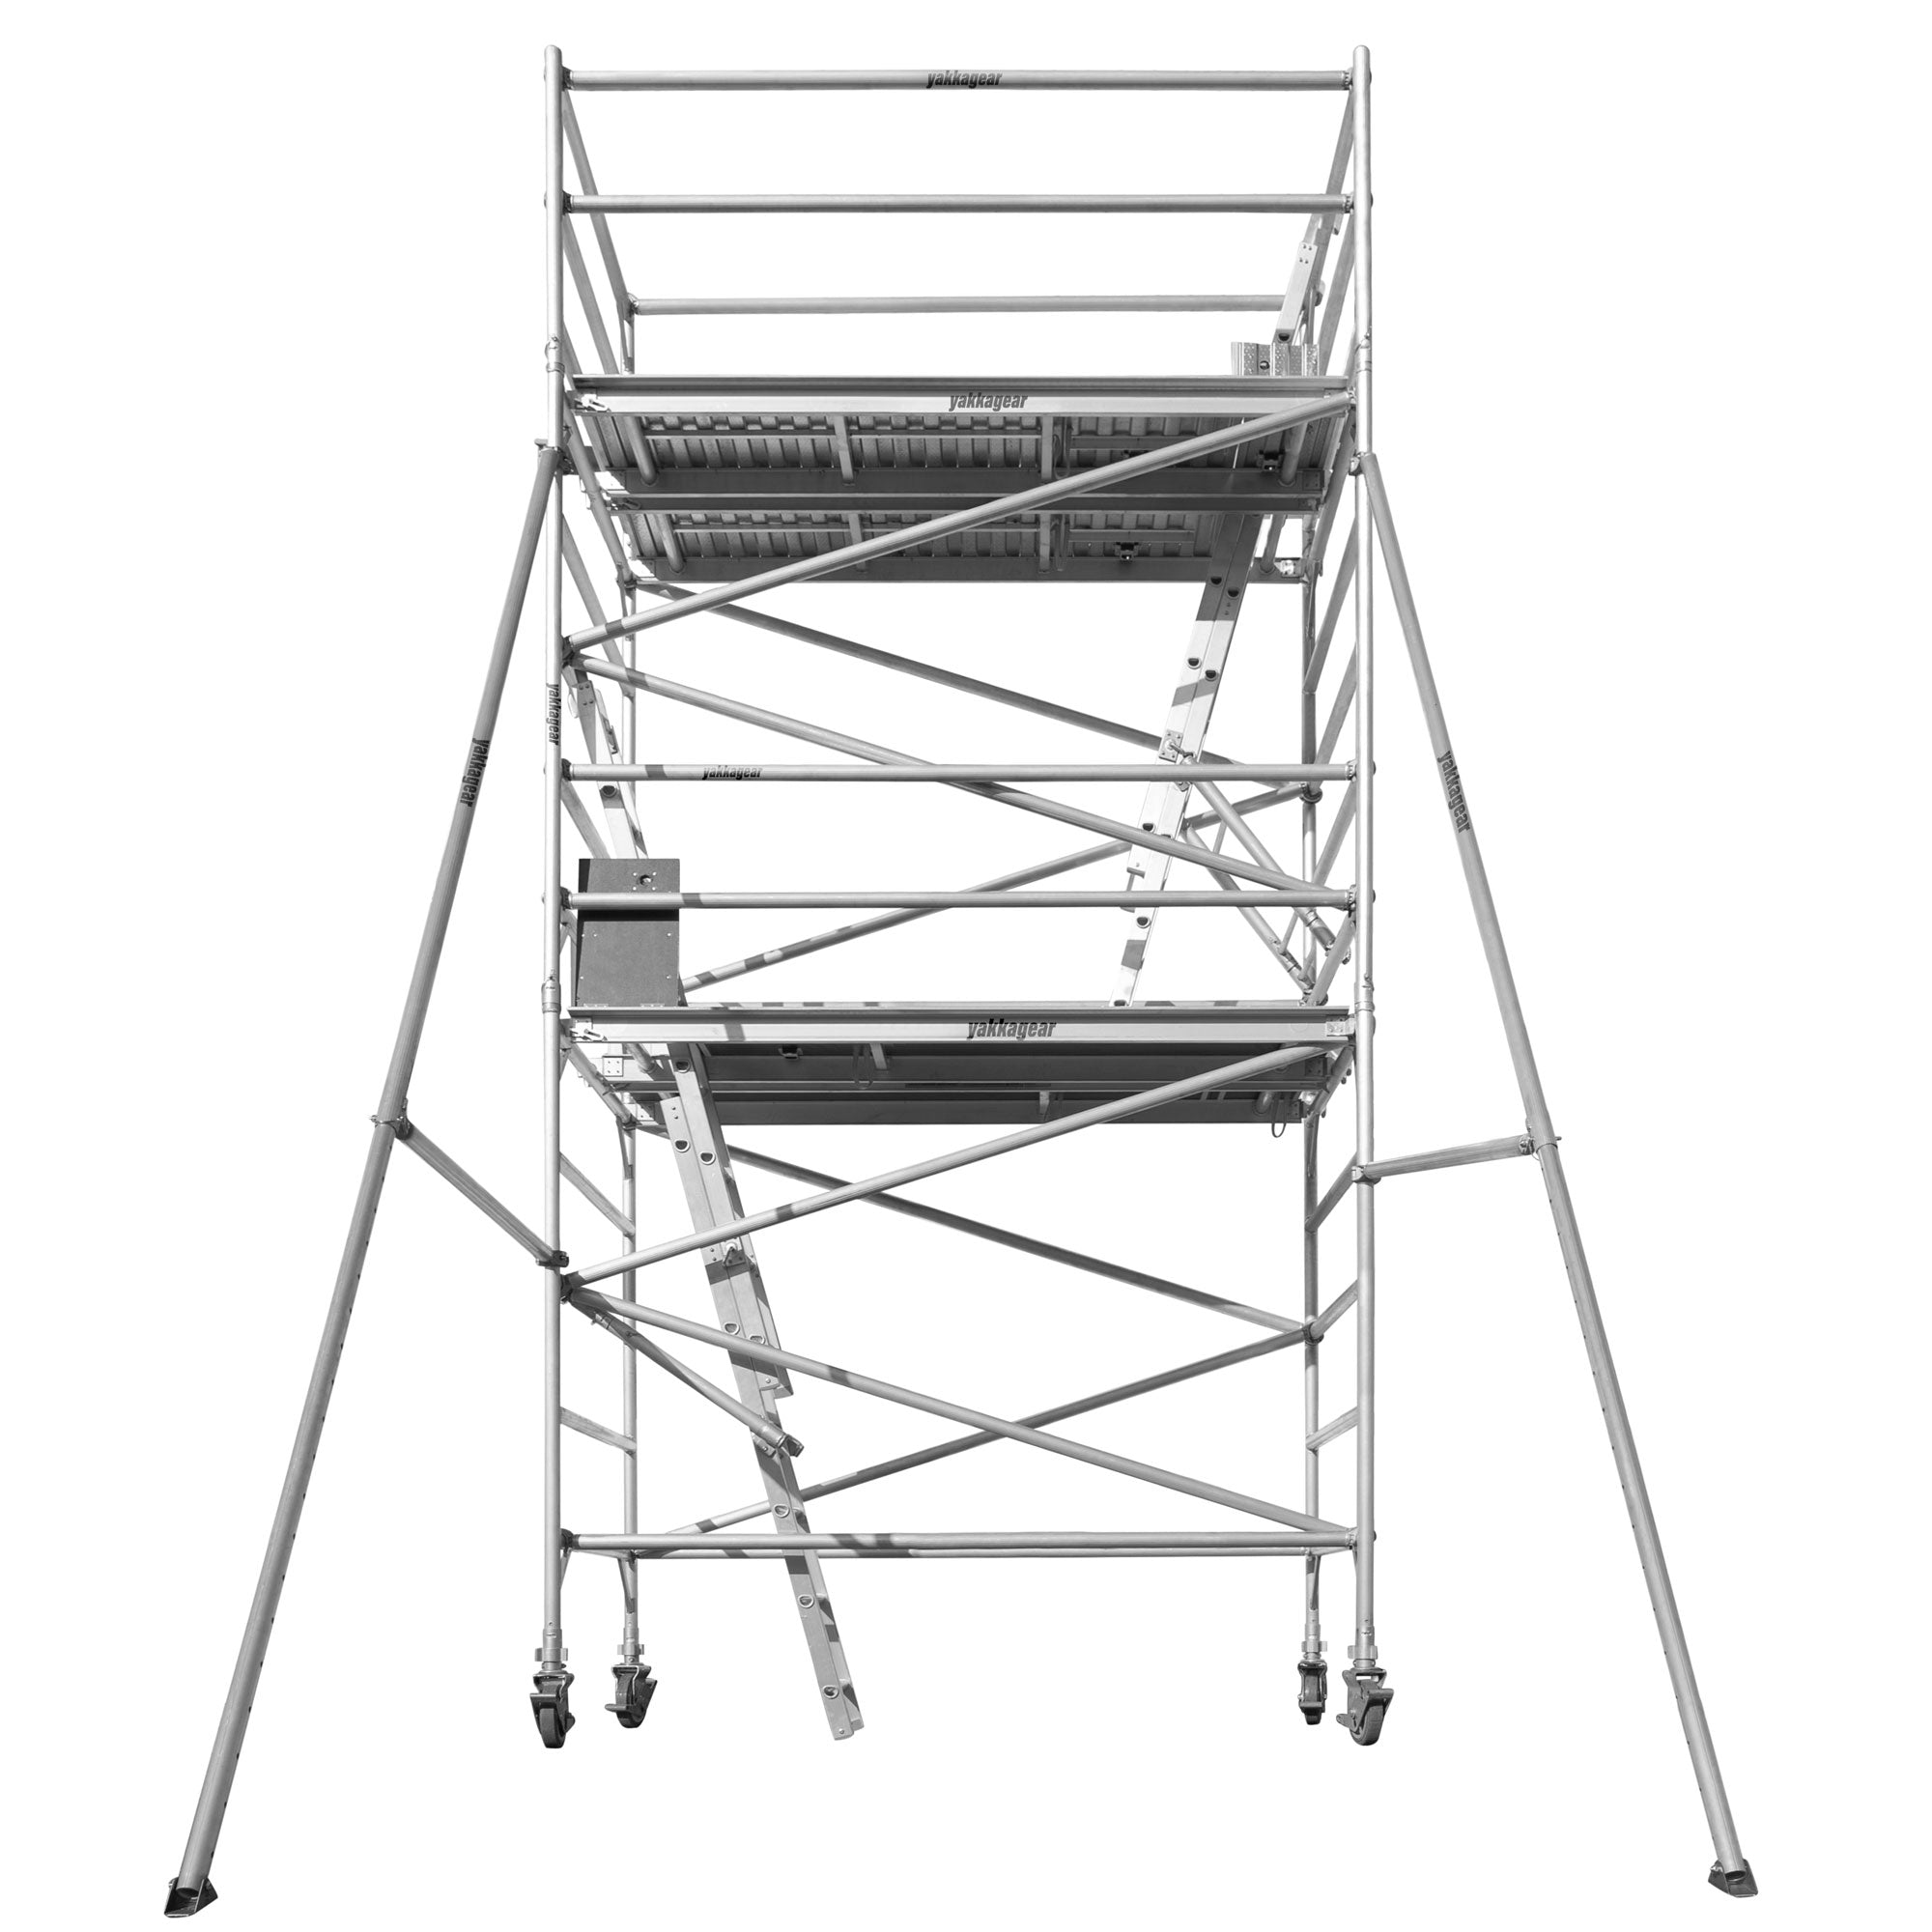 Yakka Gear Australia 2.5m Length 1.3m Wide 6.6m reach wide scaffolding tower access equipment with working height of 4.6m, view from the front angle, white background. 